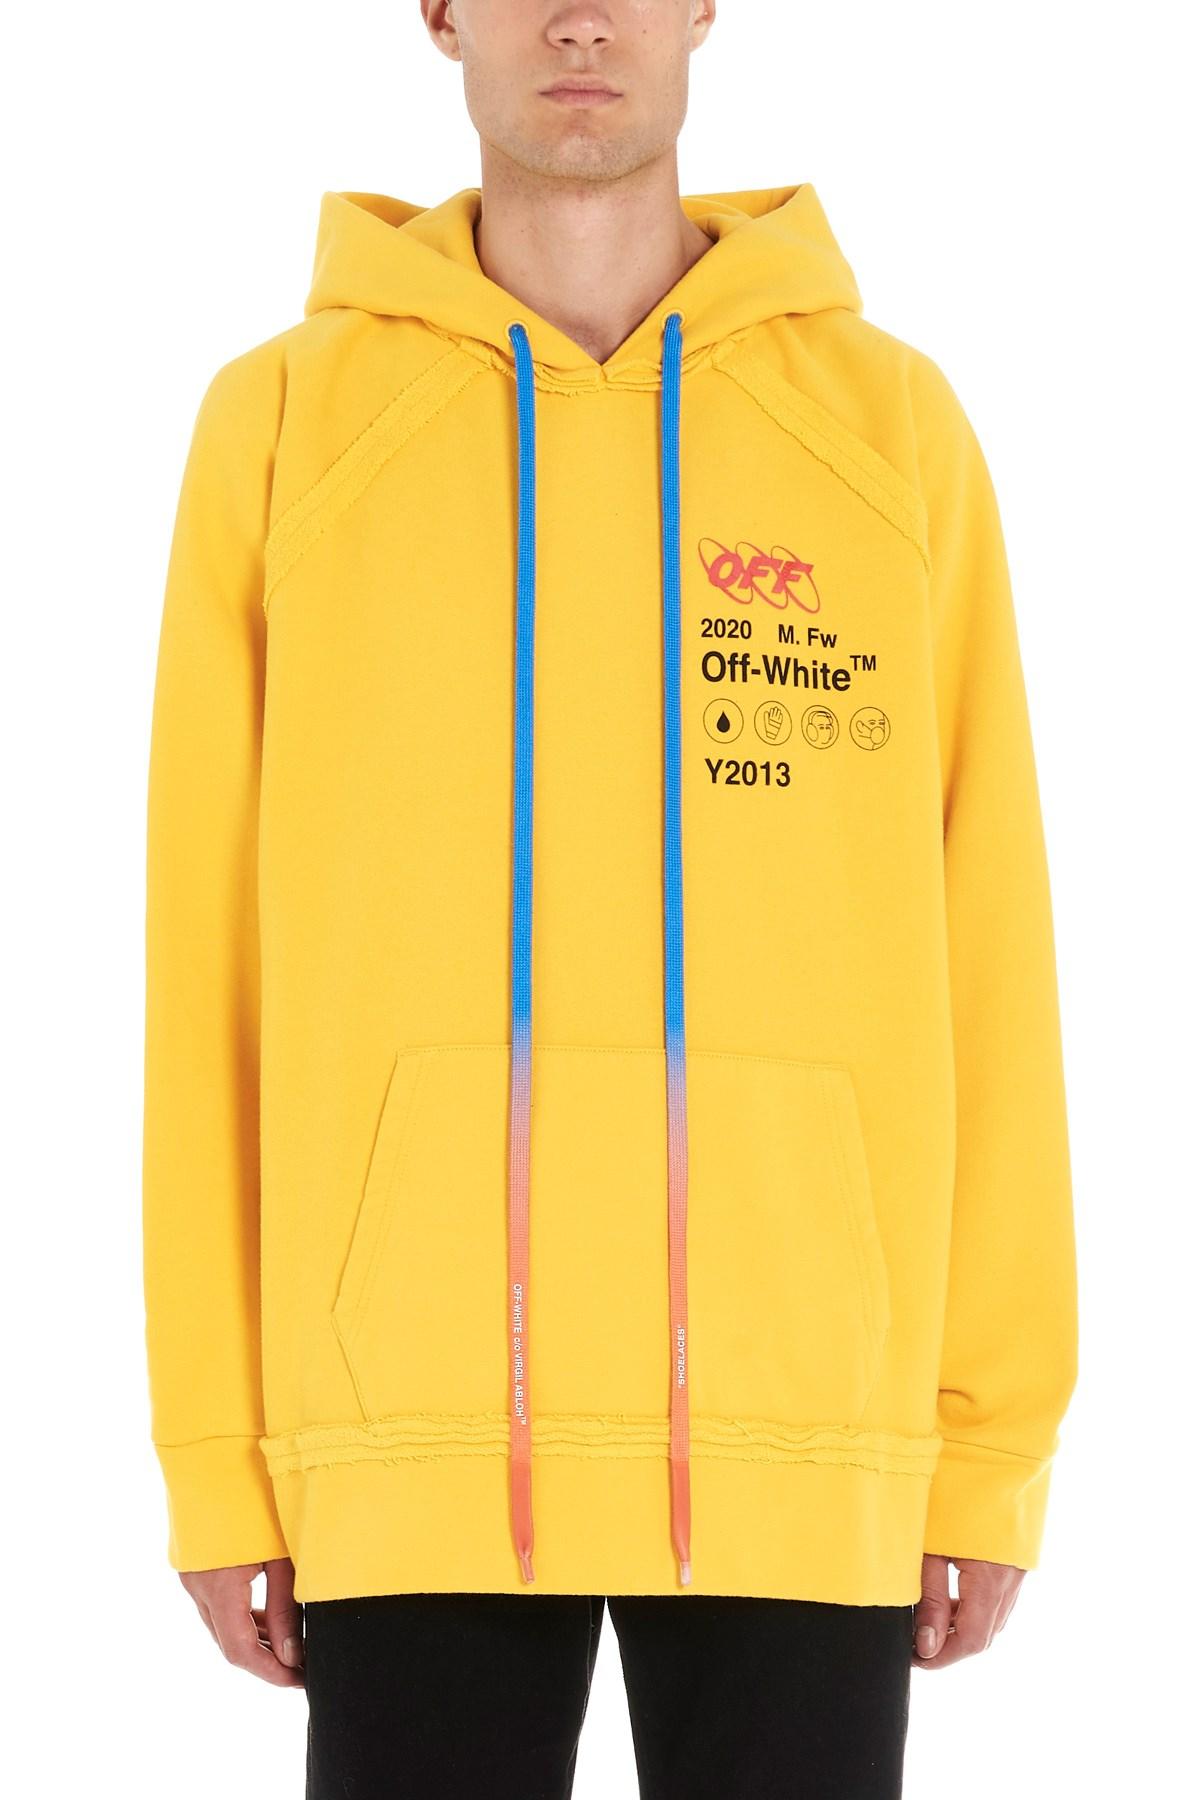 Hoodies – tagged off-white –